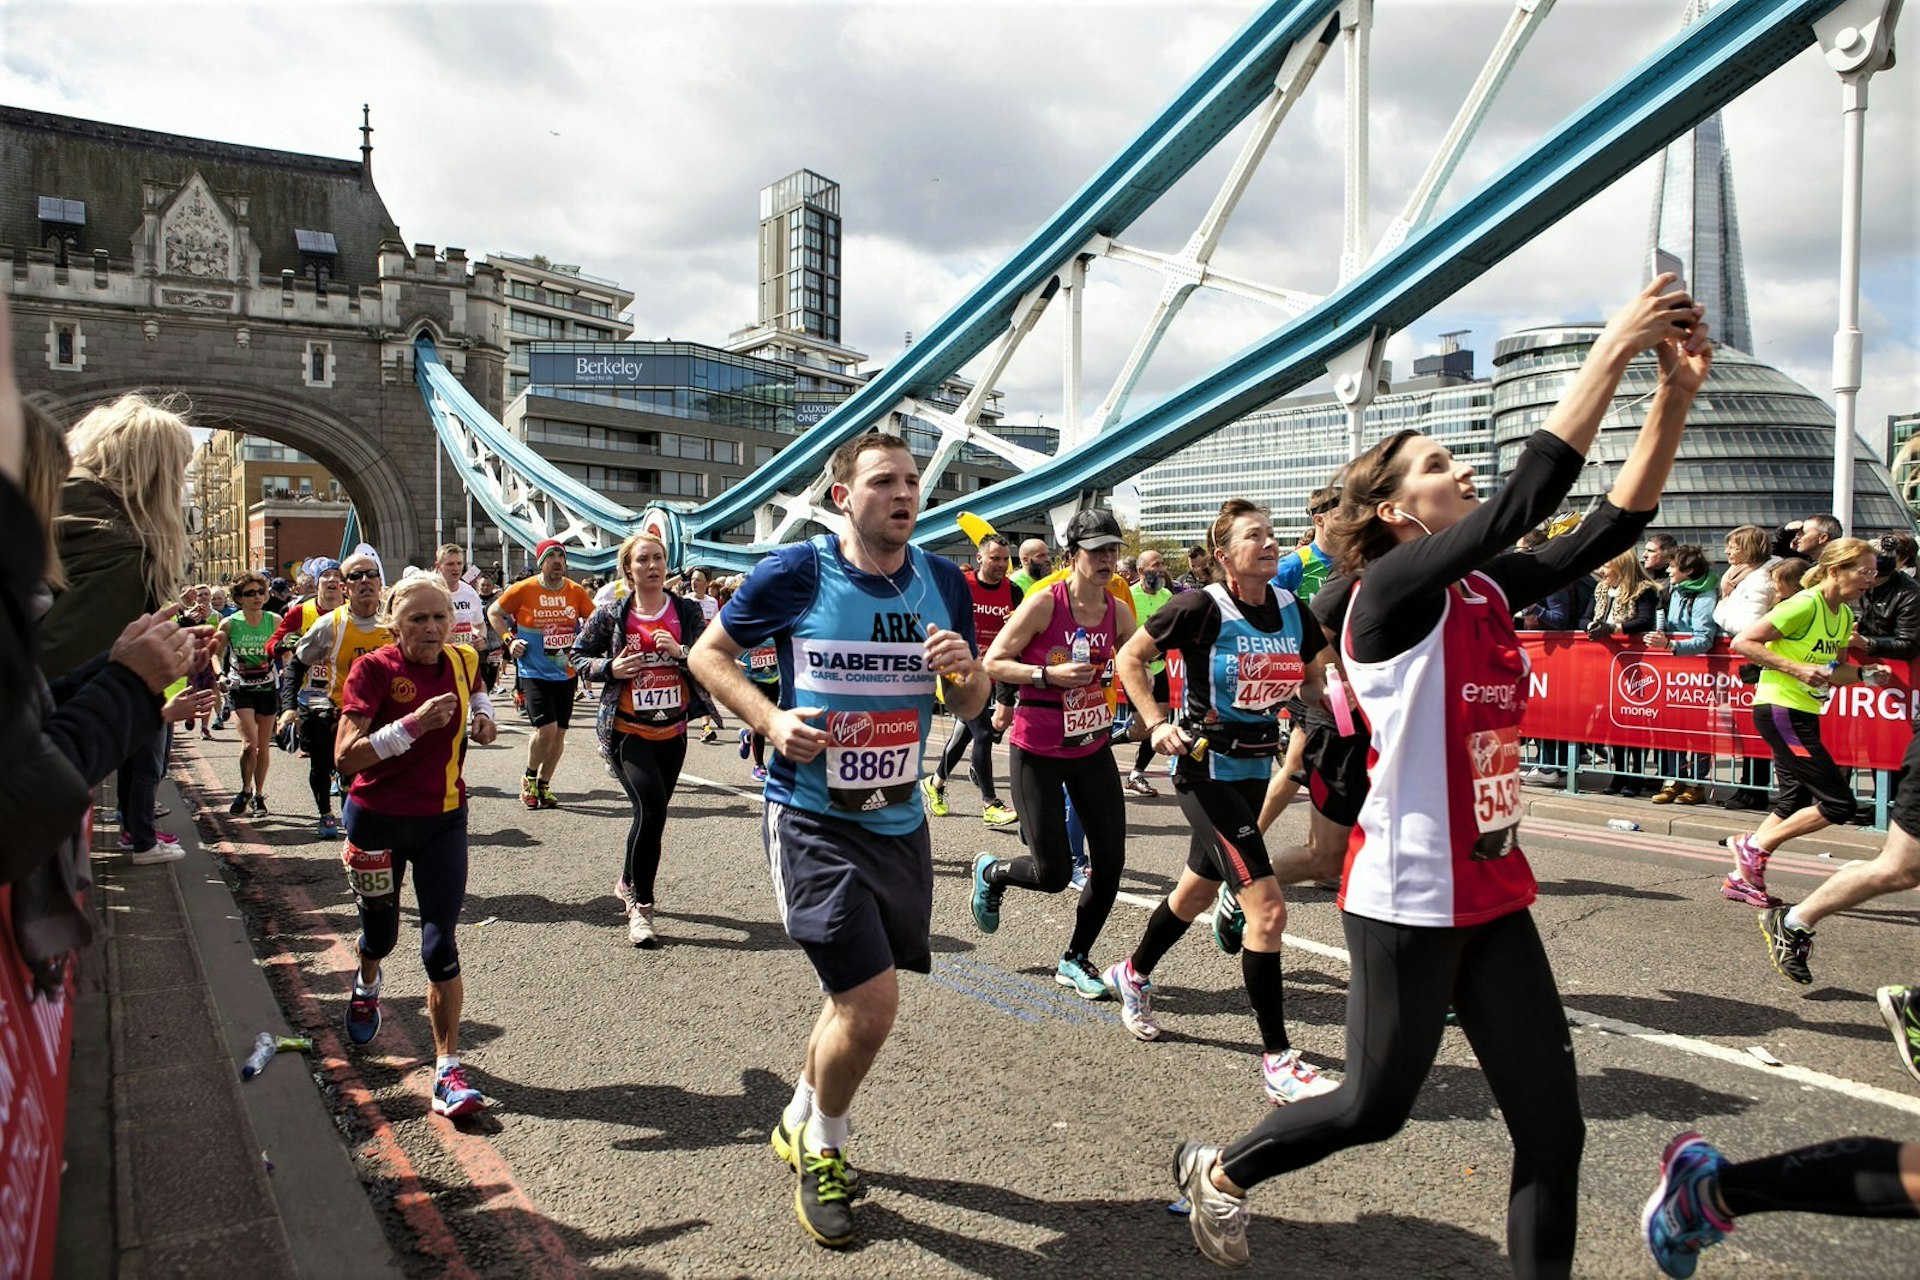 Take time to take in the sights – and even a selfie – in the London Marathon © Ms Jane Campbell / Shutterstock